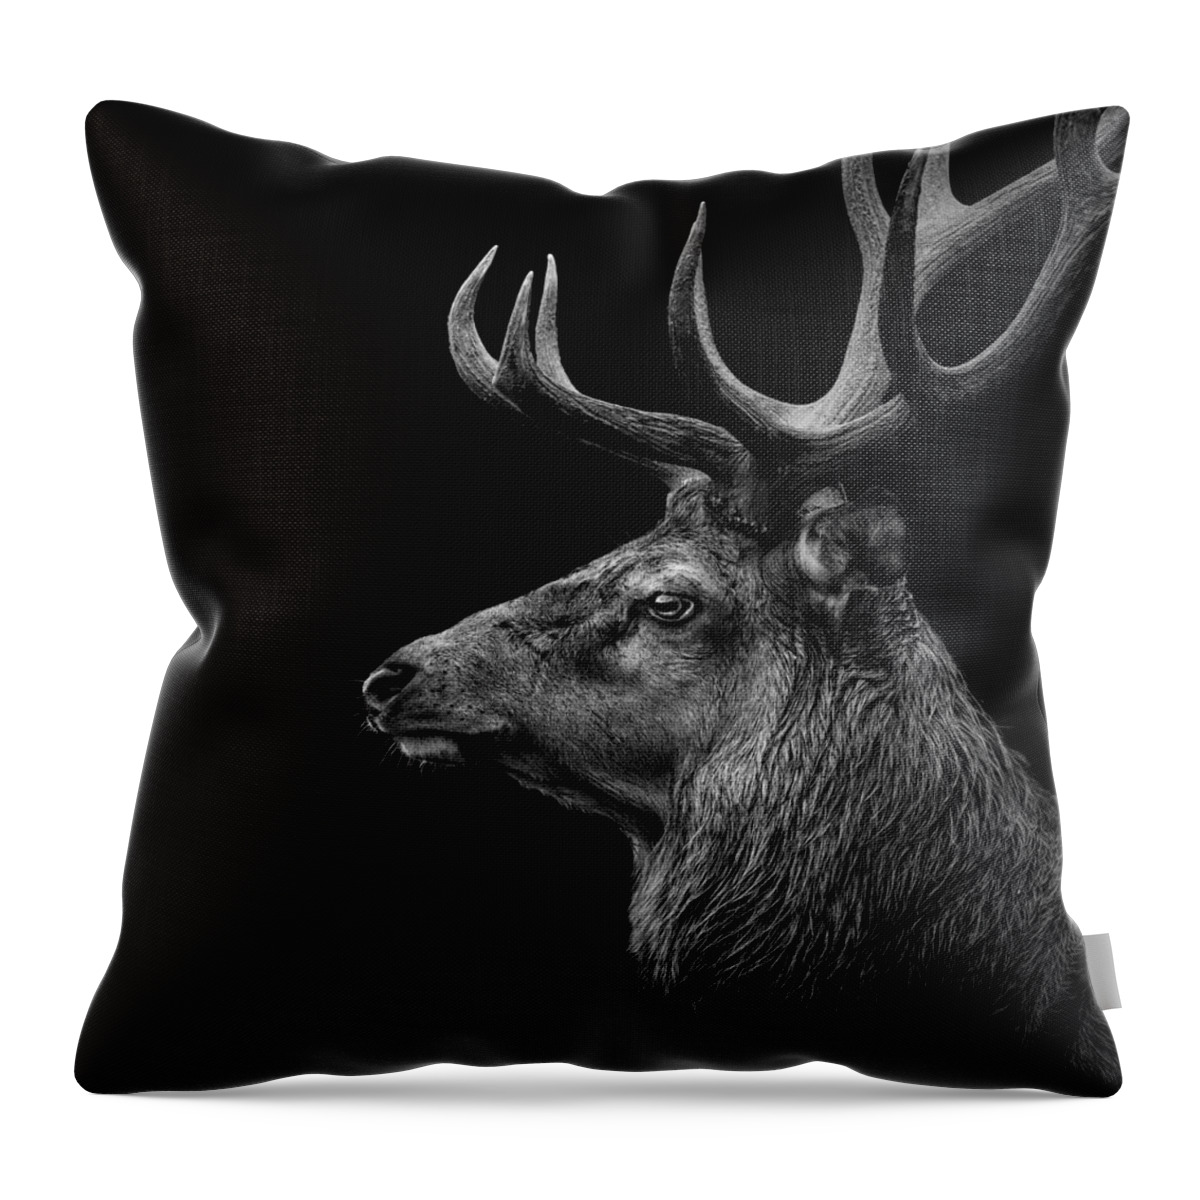 Deer Throw Pillow featuring the photograph Deer In Black And White by Lukas Holas